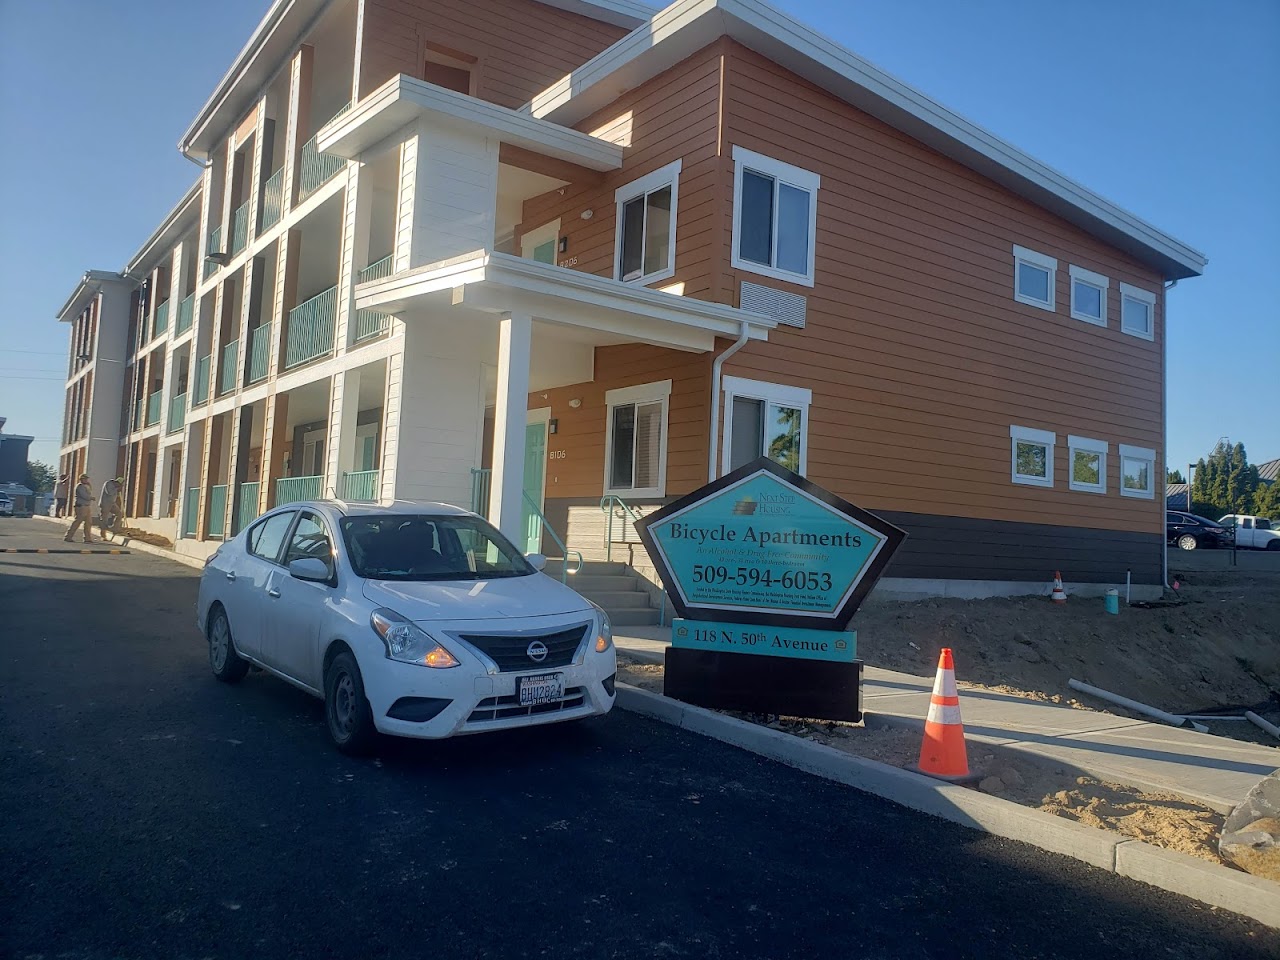 Photo of BICYCLE APARTMENTS, THE. Affordable housing located at 118 N. 50TH AVENUE YAKIMA, WA 98908